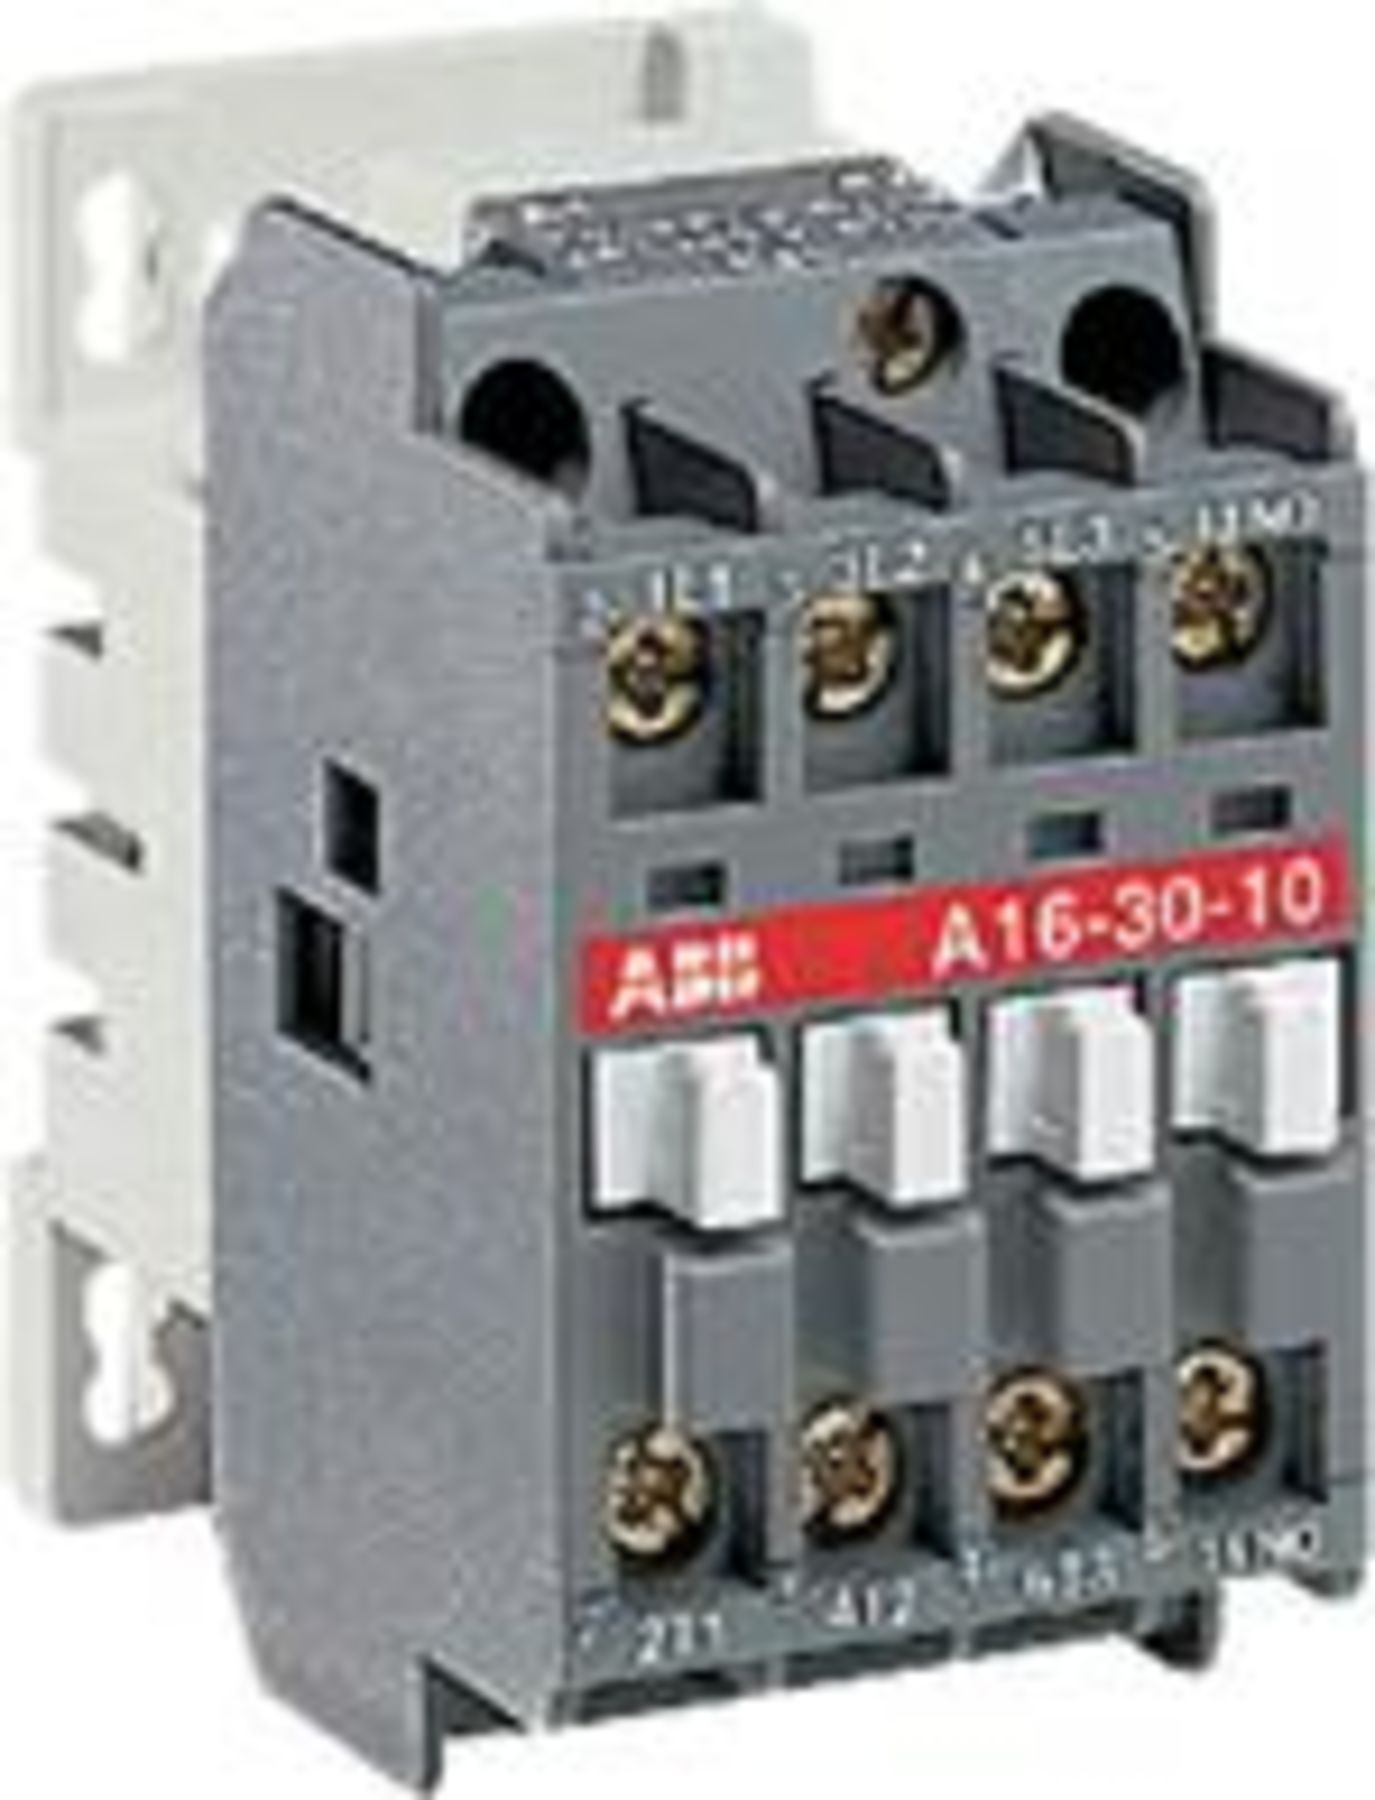 Contactor A16-30-10-83 AC48V 16A Directly replace for ABB Contactor A16-30-10-83 